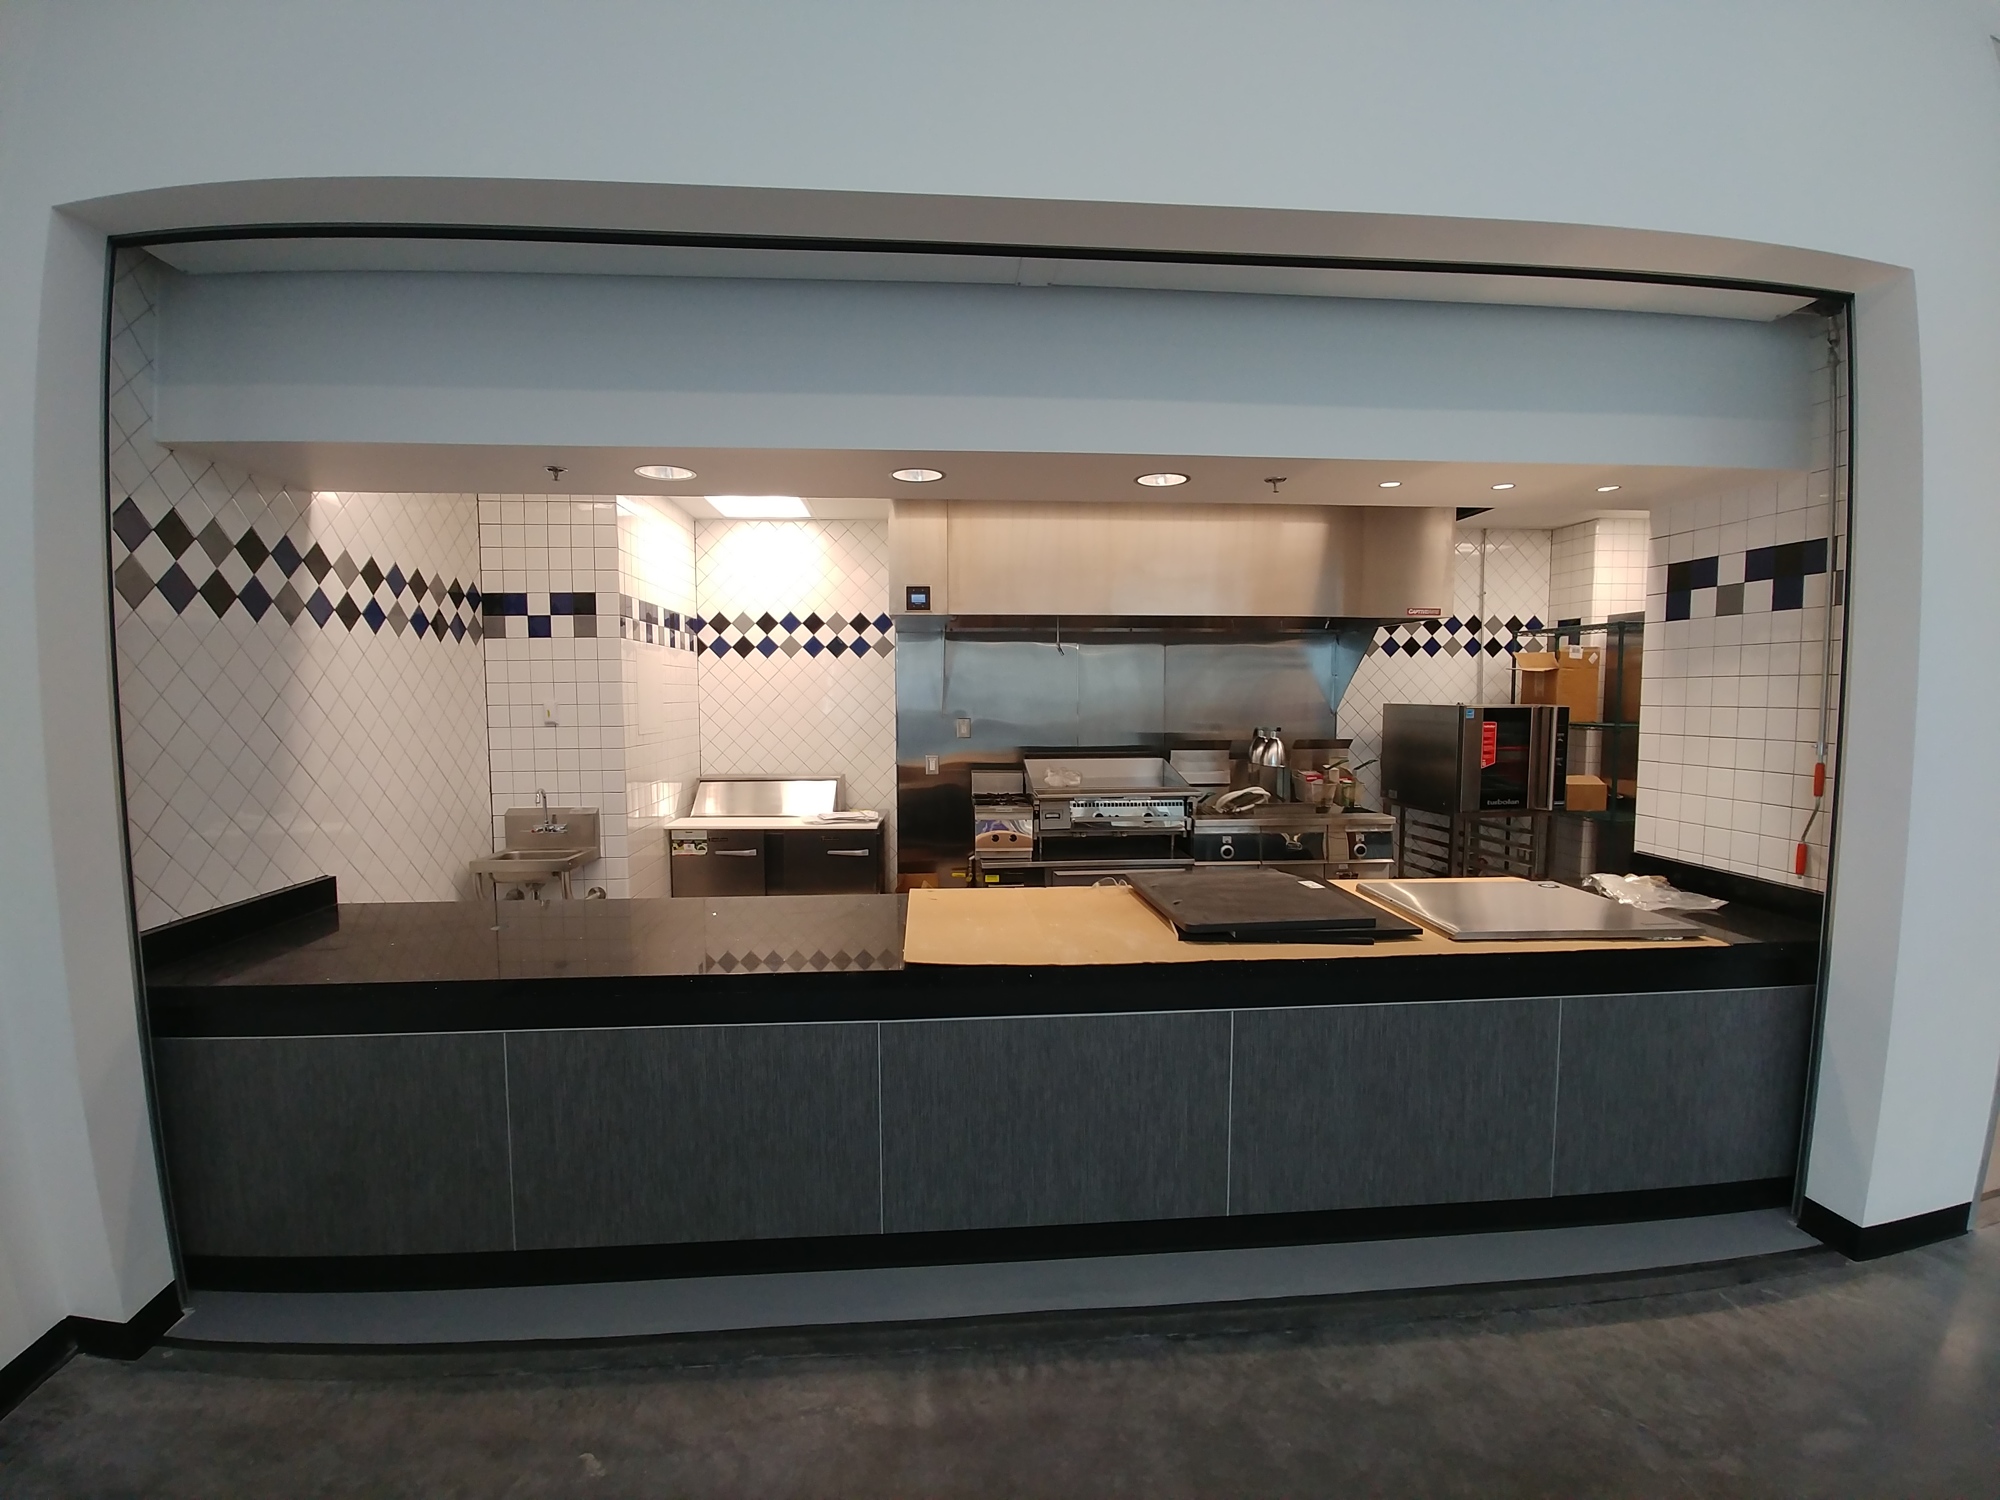 The restaurant area will be operated by the same food vendors as in the current station.